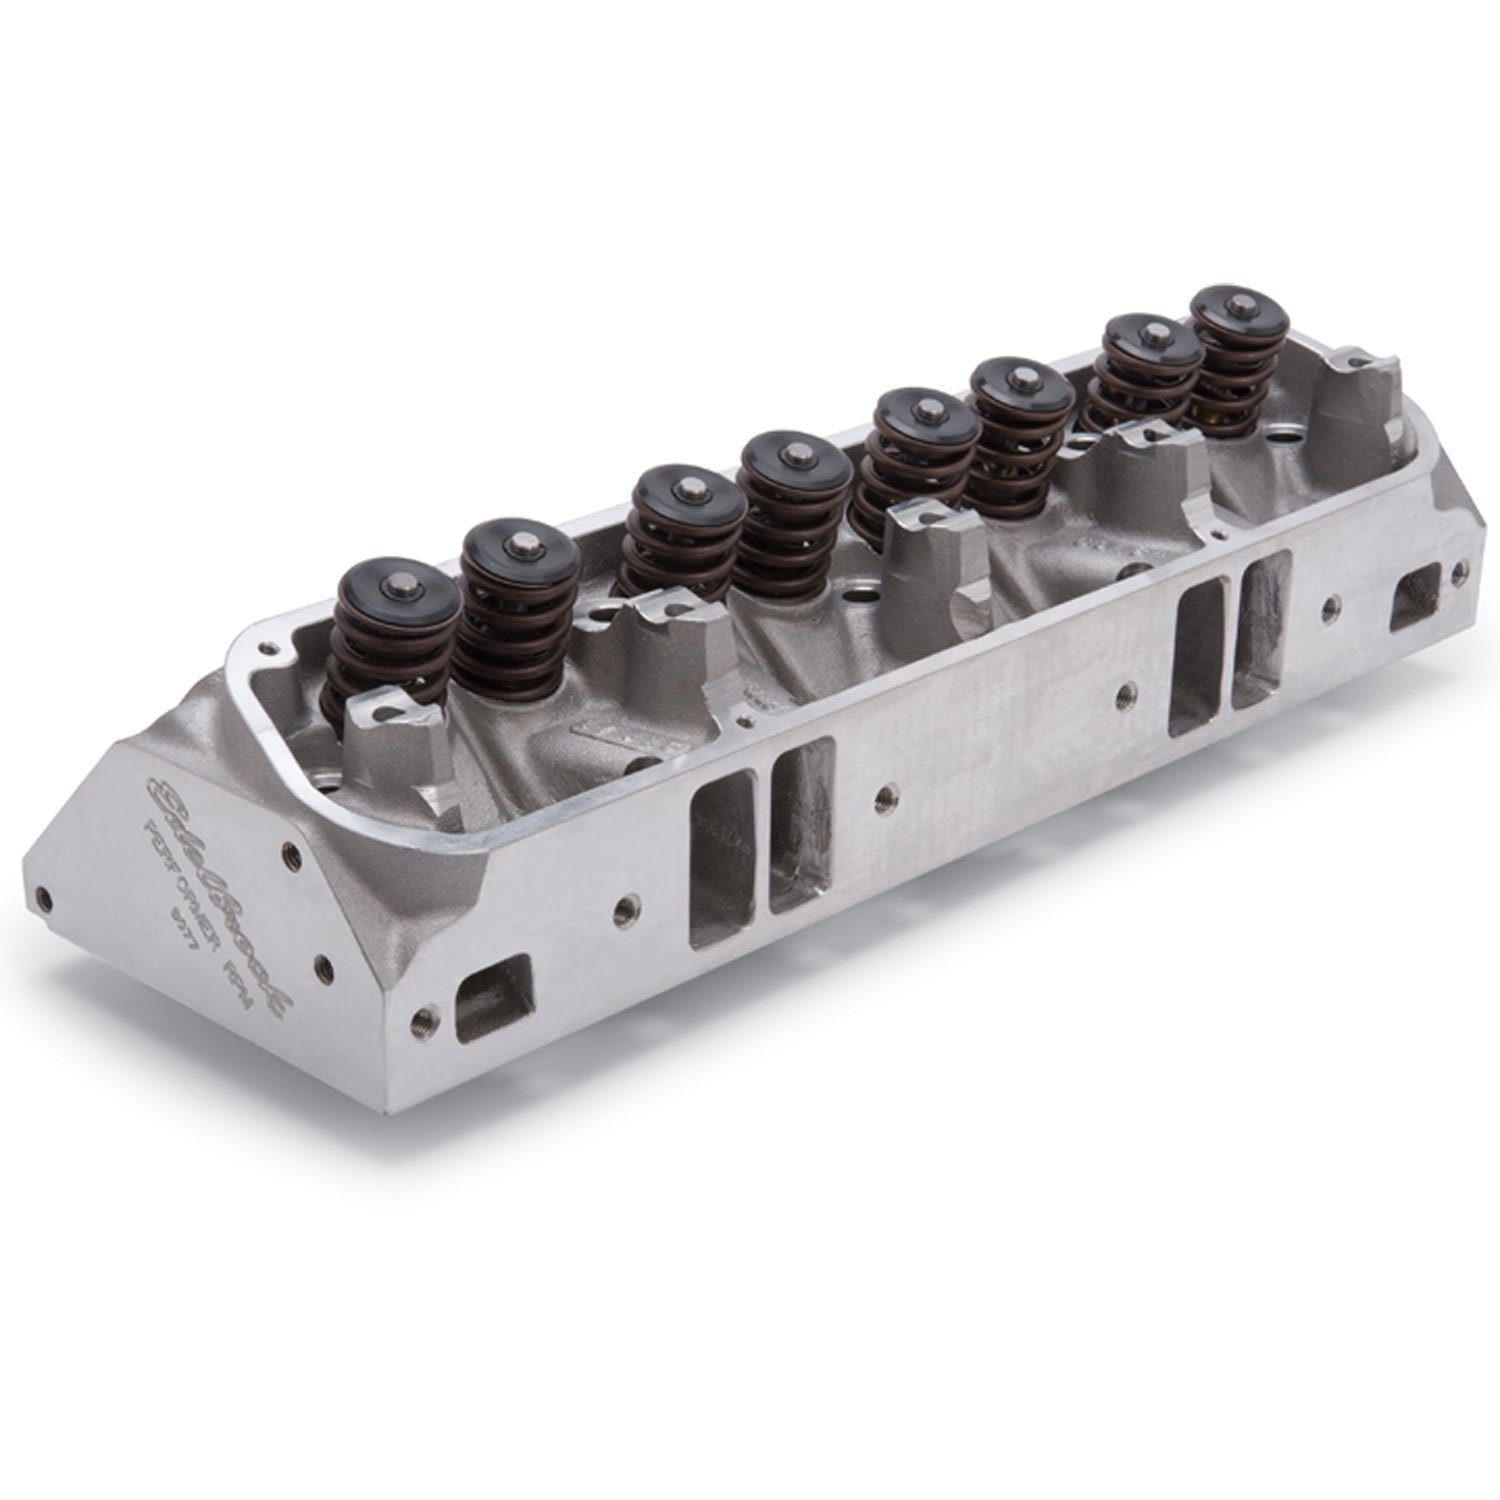 Performer RPM Cylinder Head for Small Block Chrysler